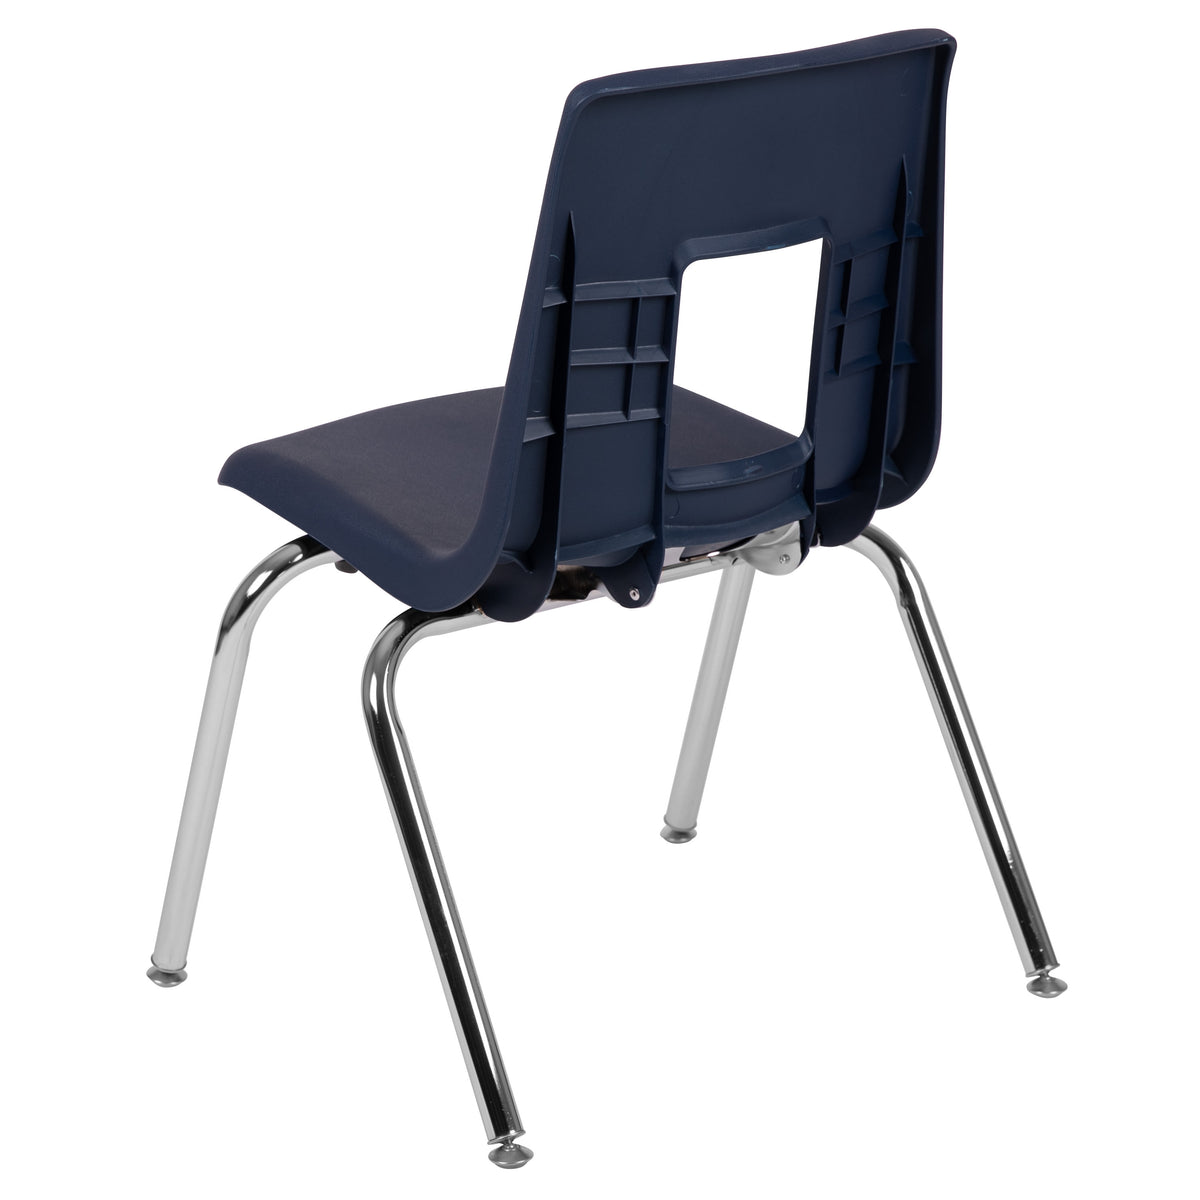 Navy |#| Navy Student Stack Chair 16inchH Seat - School Classroom Chair for 3rd-7th Grade